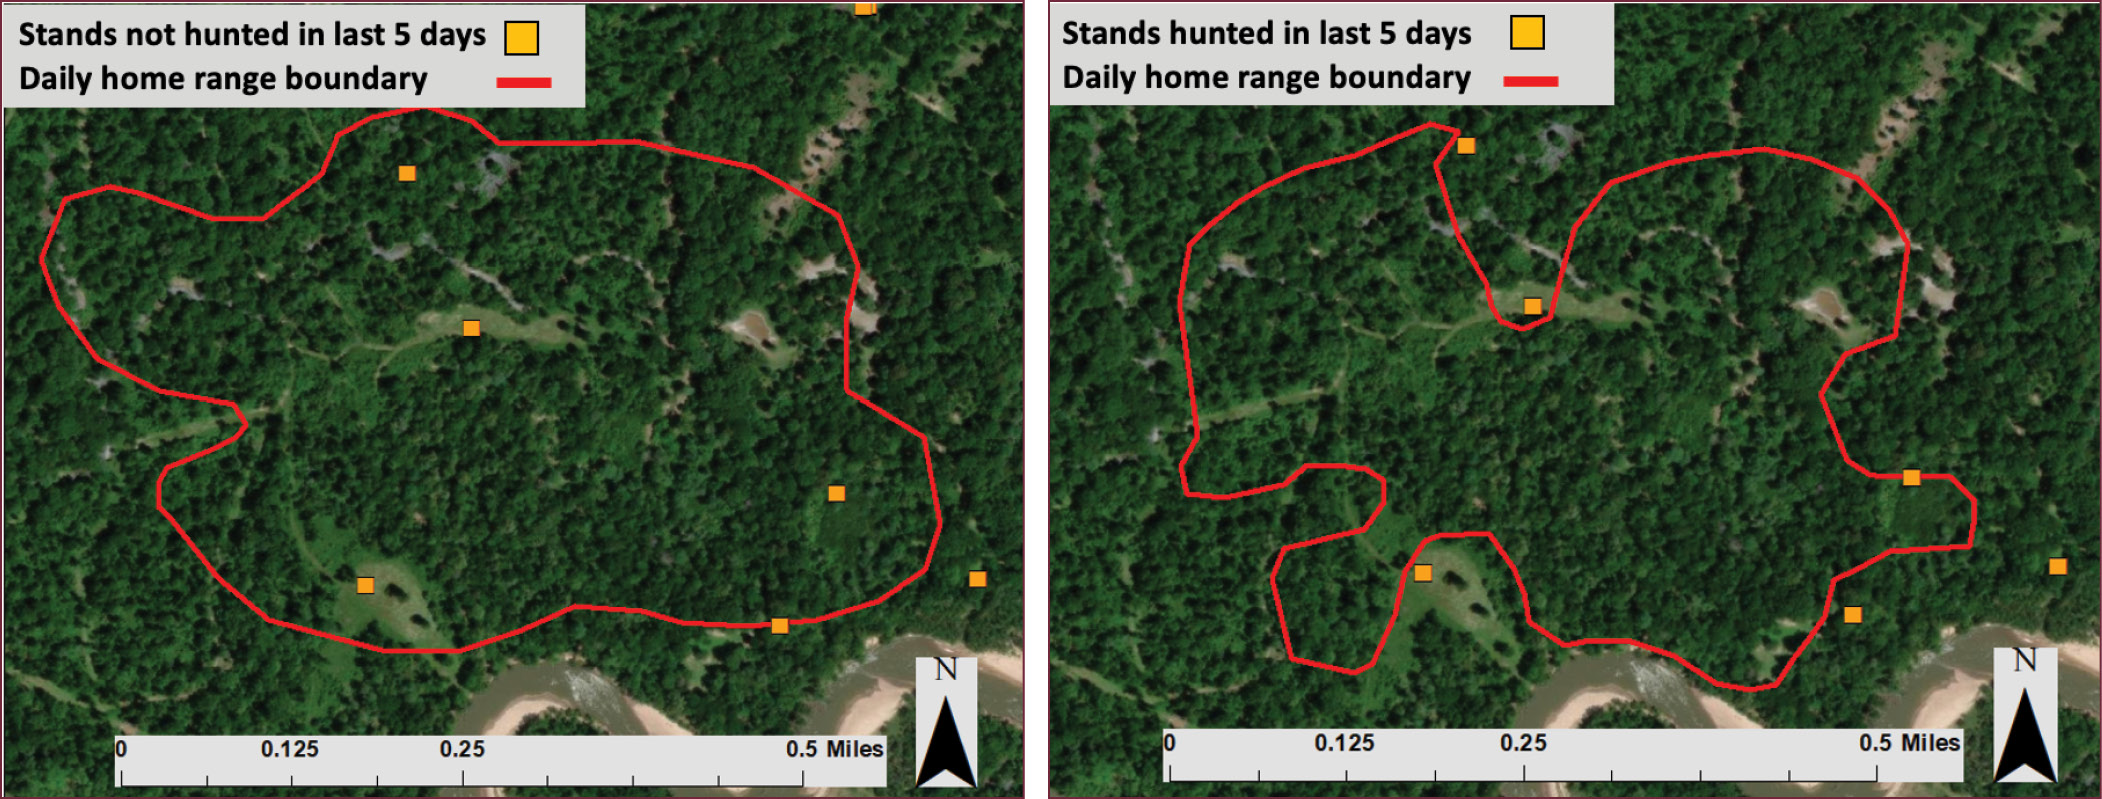 Aerial views of landscape showing a theoretical home range of a buck which will either include hunting stands if rarely hunted, or exclude hunting stands if frequently hunted. 